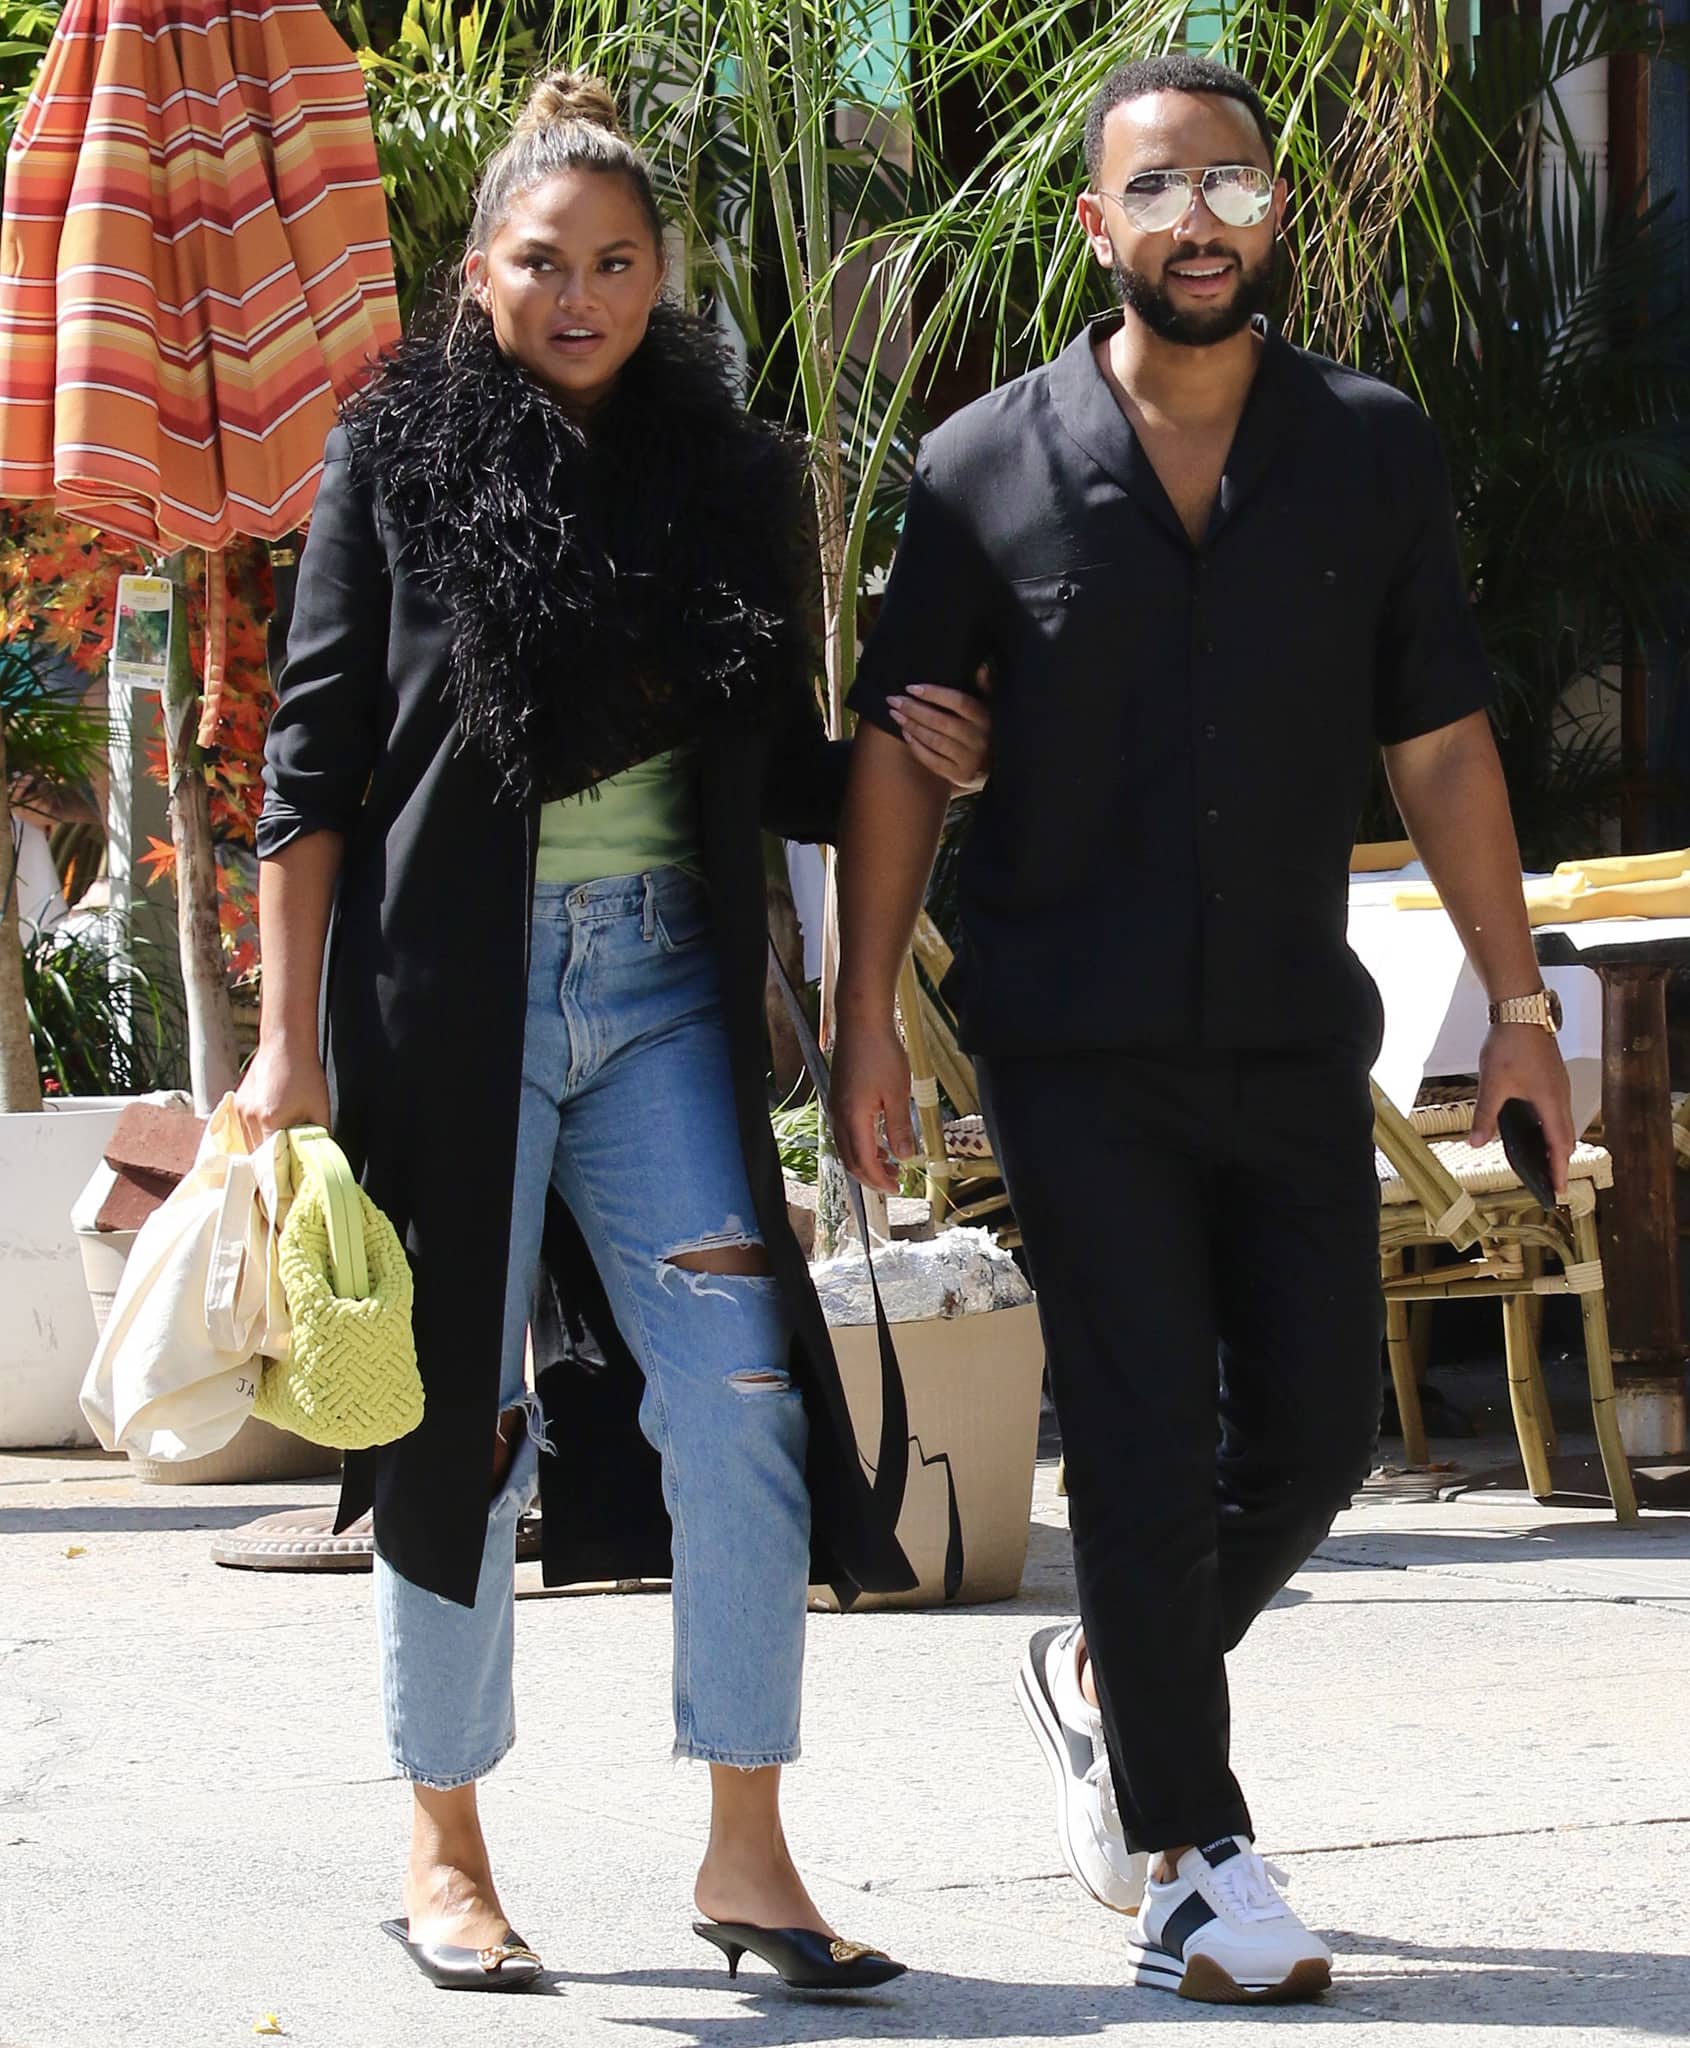 John Legend looks handsome in his black shirt, jeans, and Tom Ford James sneakers